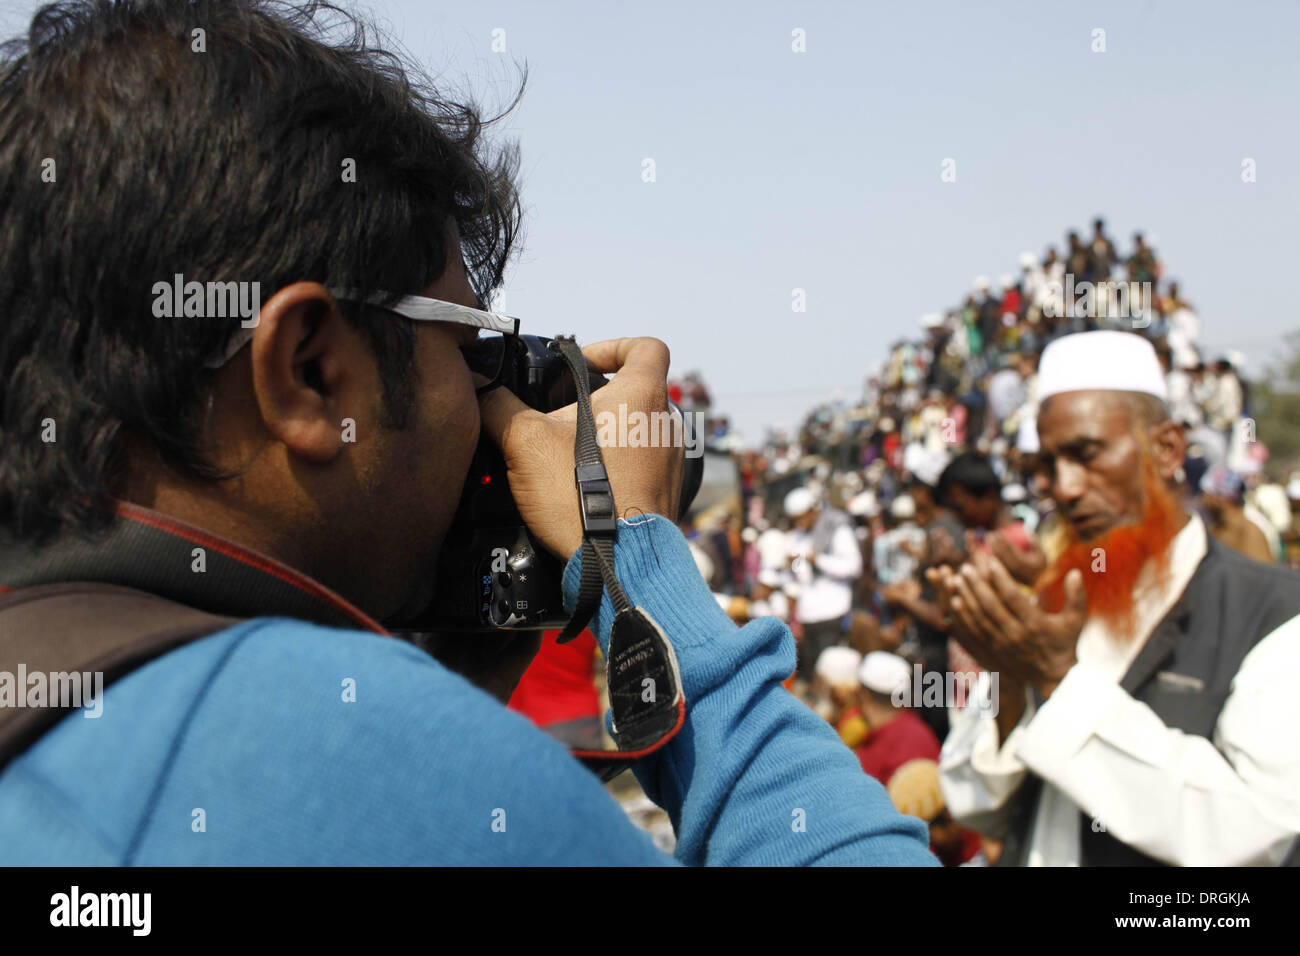 A photographer take picture of Muslim devotees attend the Akheri Munajat. Dhaka,Bangladeshi Muslim devotees attend the Akheri Munajat concluding prayers on the third day of Biswa Ijtema, the second largest Muslim congregation after the Hajj, at Tongi with more than two million Muslims from Bangladesh and abroad. The Biswa Ijtema, the world’s second largest religious gathering of Muslims concluded with the prayer of Akheri Munajat on the bank of river Turag. The event focuses on prayers and meditation and does not allow political discussion. Stock Photo